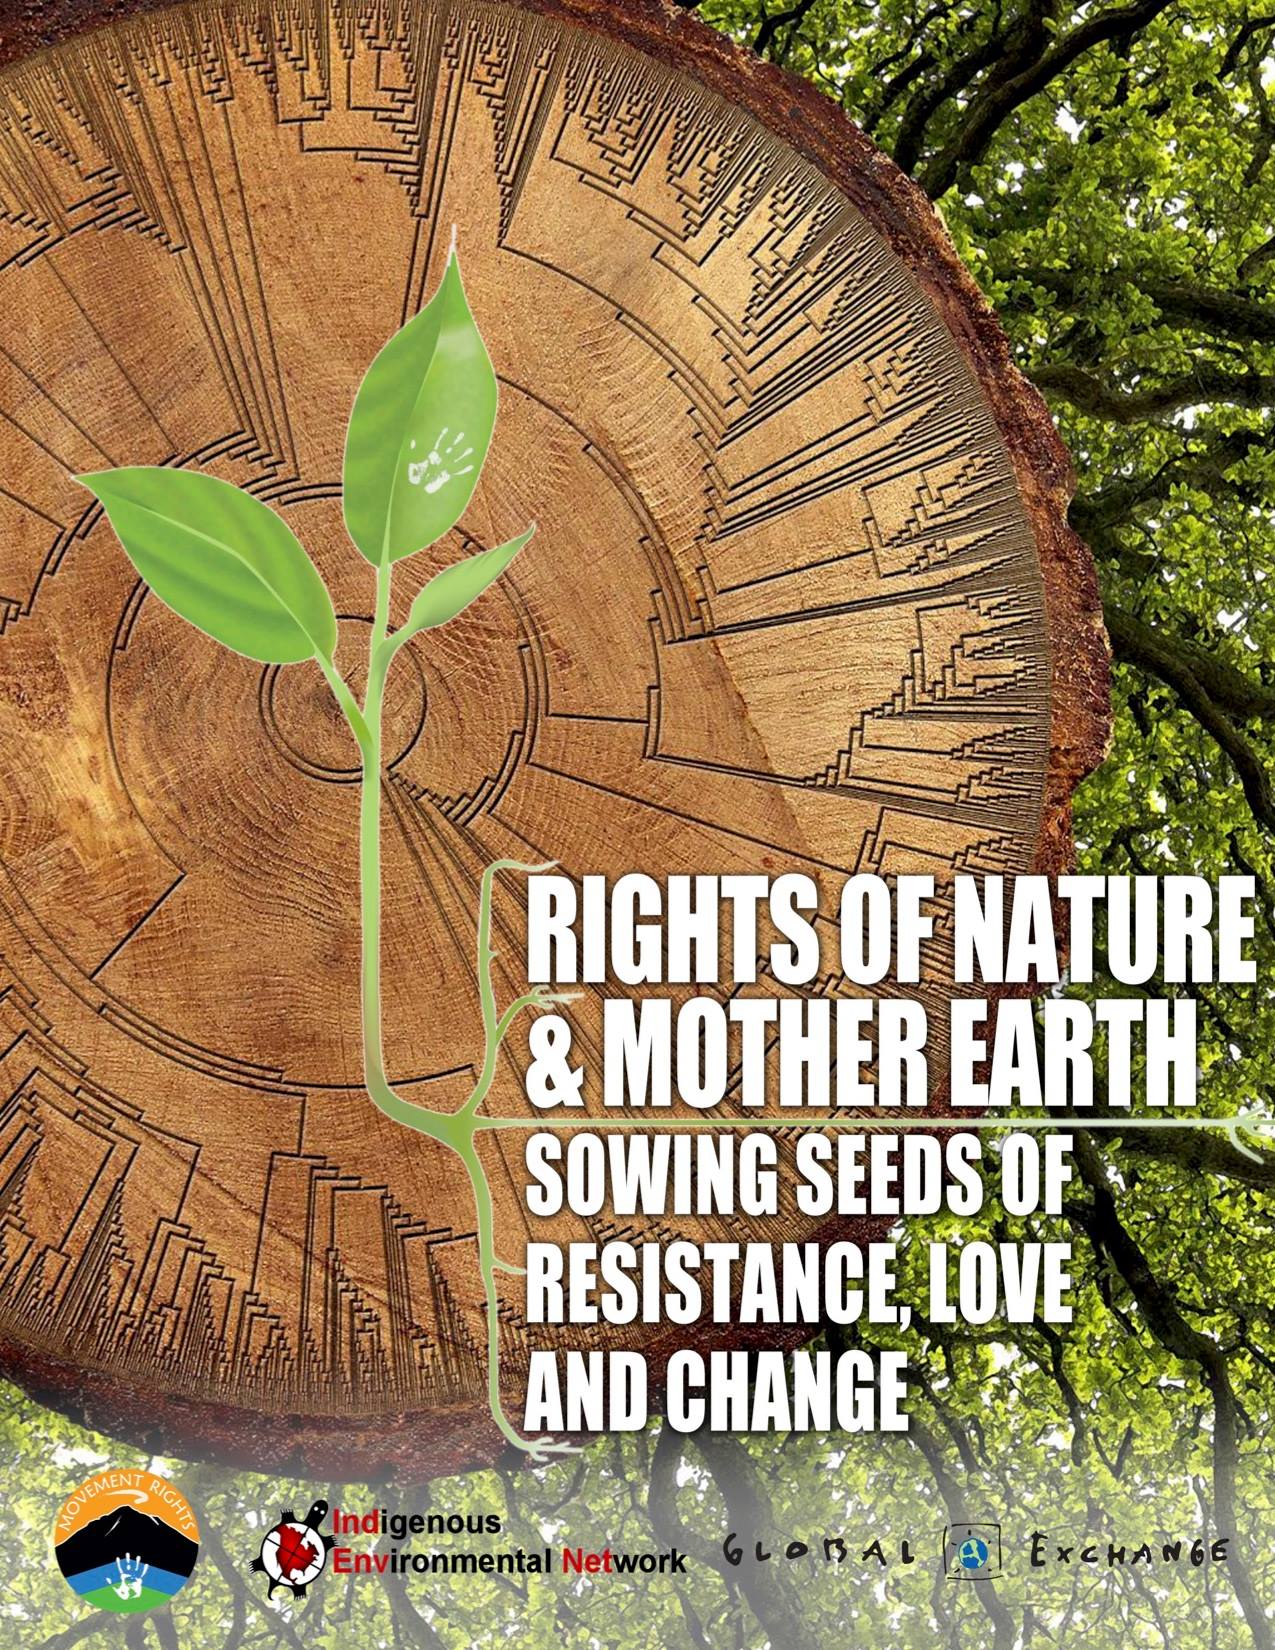 Rights of Nature & Mother Earth: Sowing seeds of resistance, love and change.